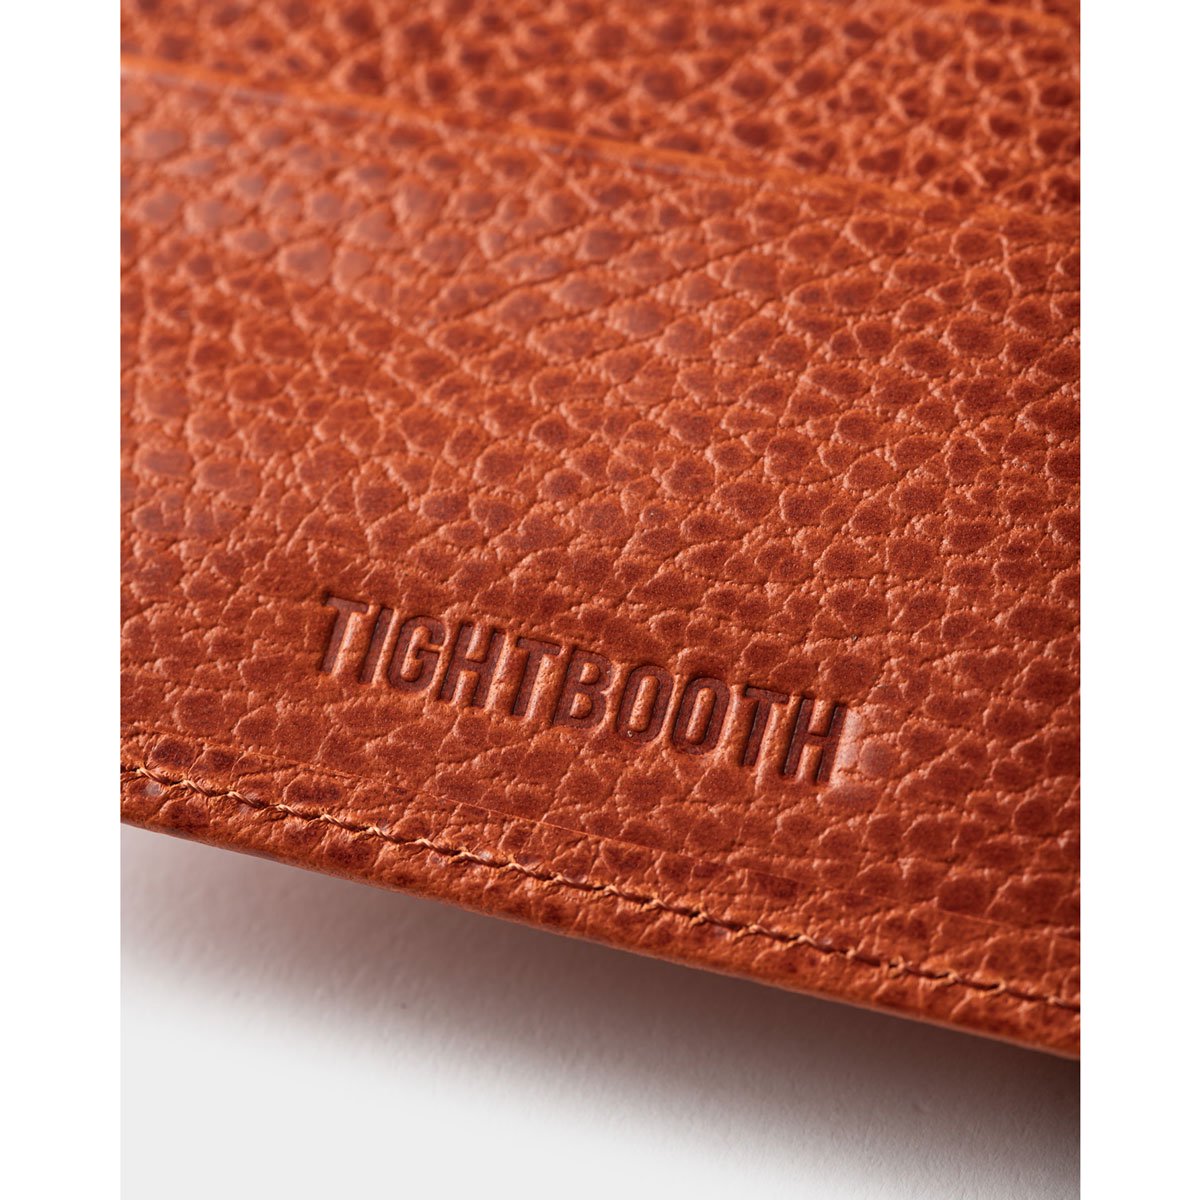 TIGHTBOOTH - LEATHER BIFOLD WALLET - SHRED